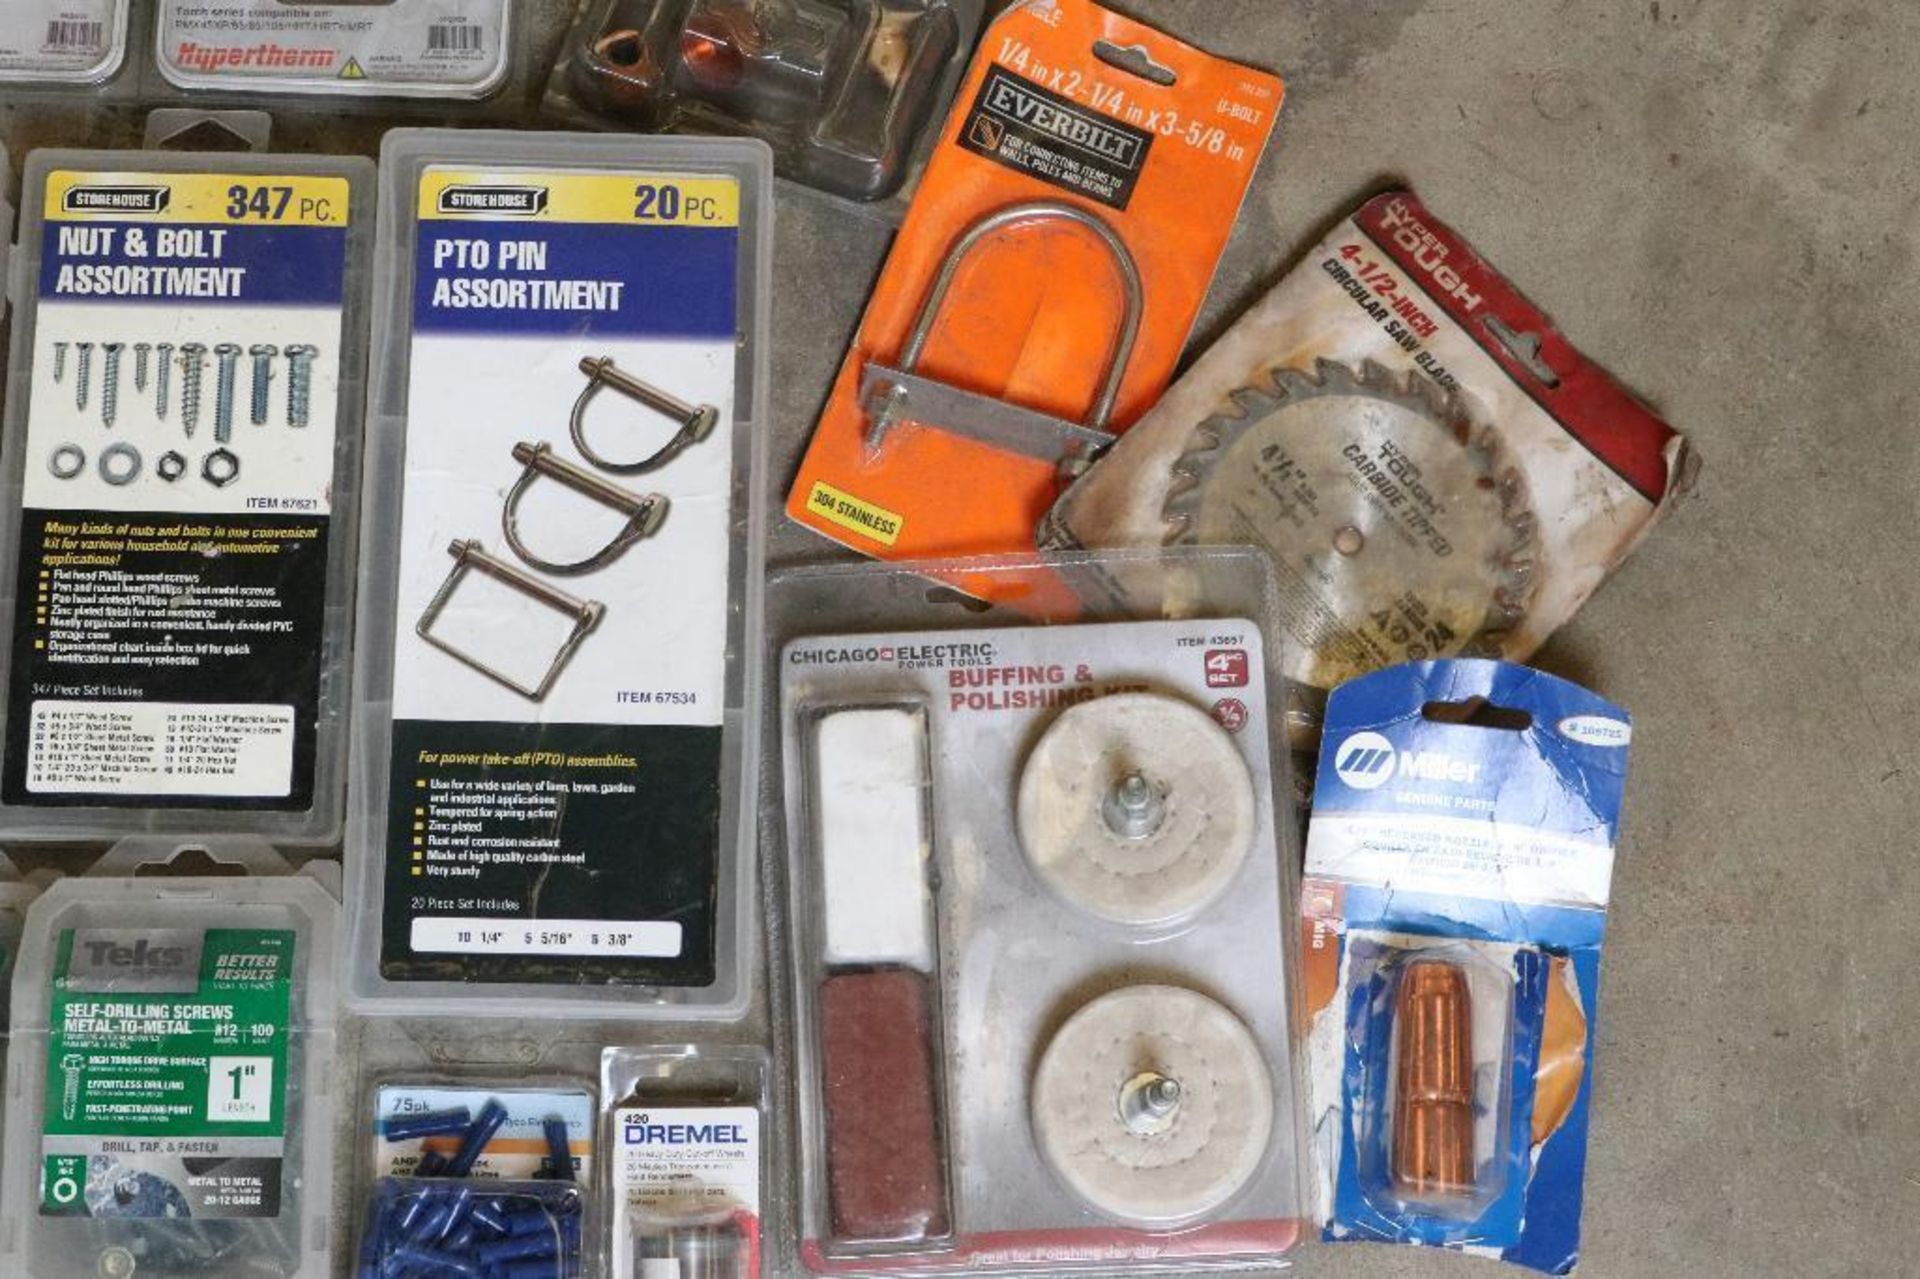 Assortment of Misc. Hardware - Screws, Nozzles, Blades Clamps and More - Image 7 of 9